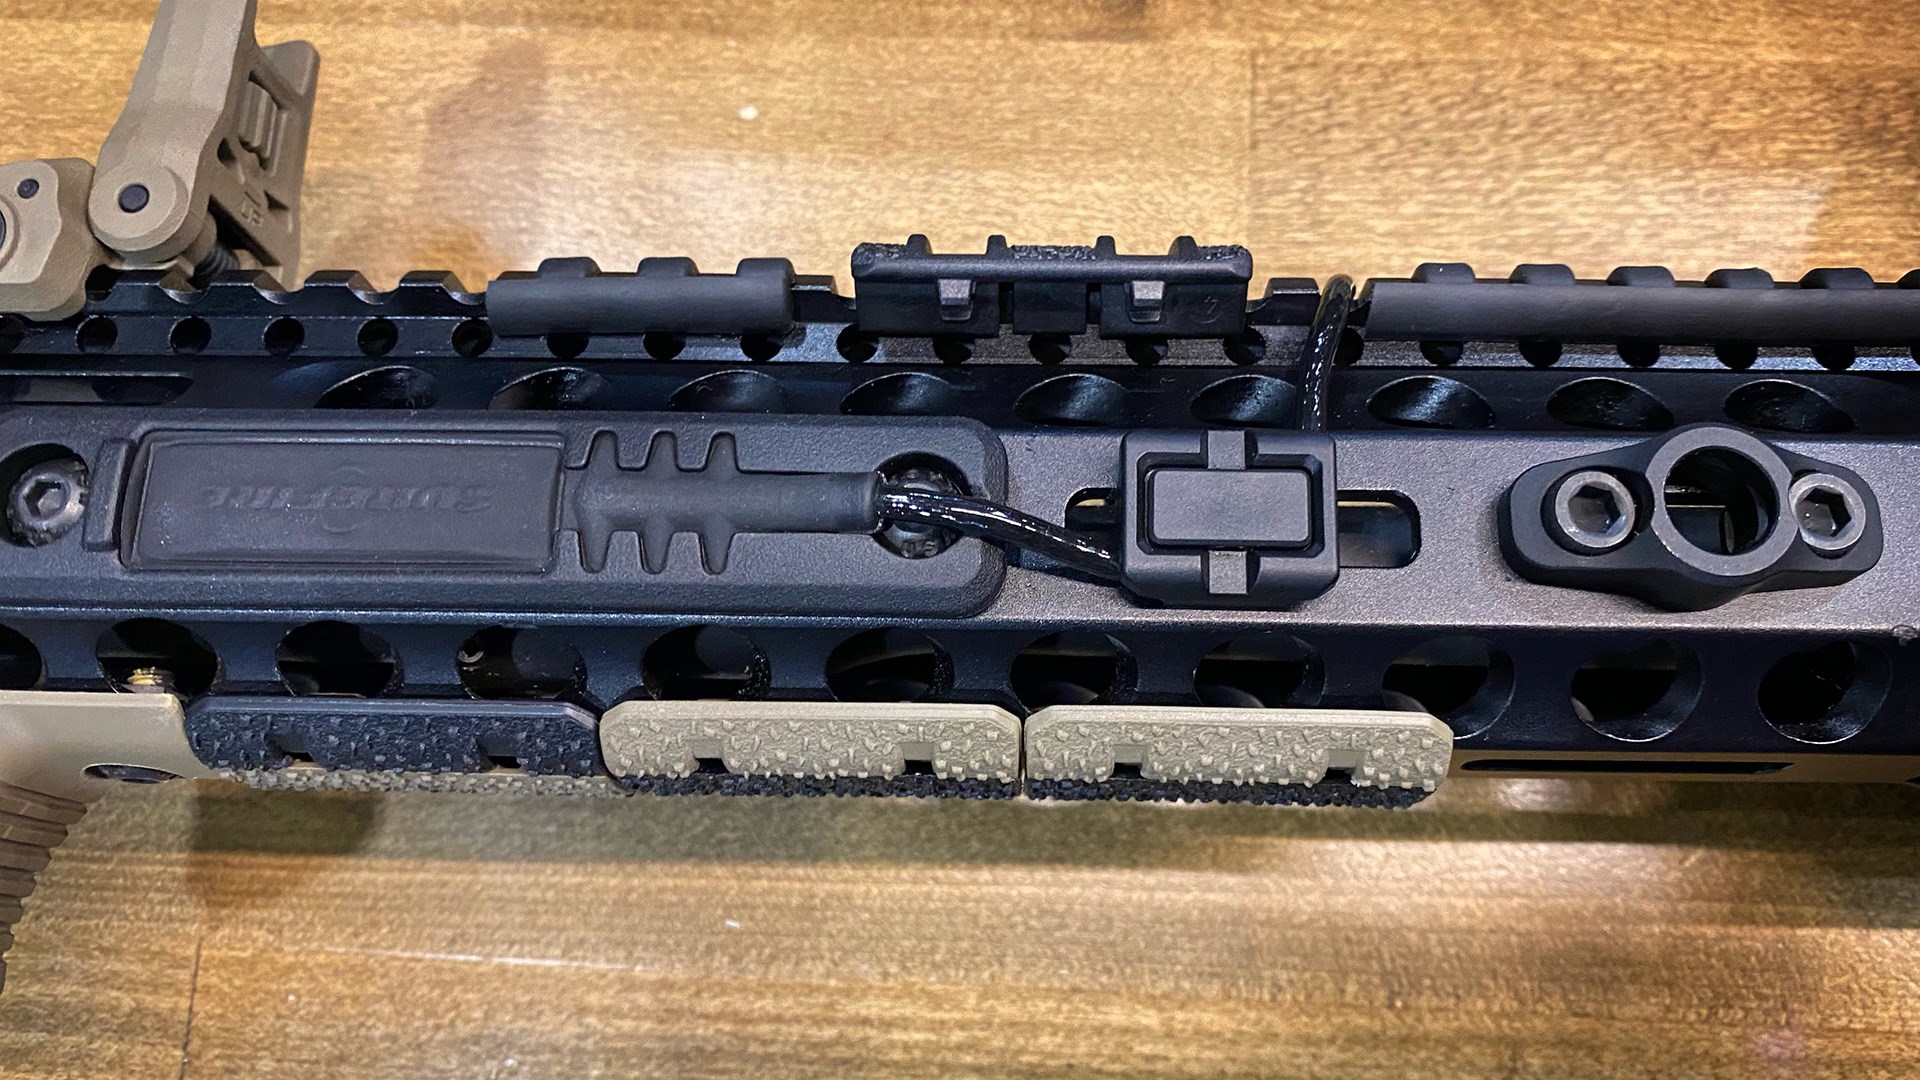 Magpul cable management